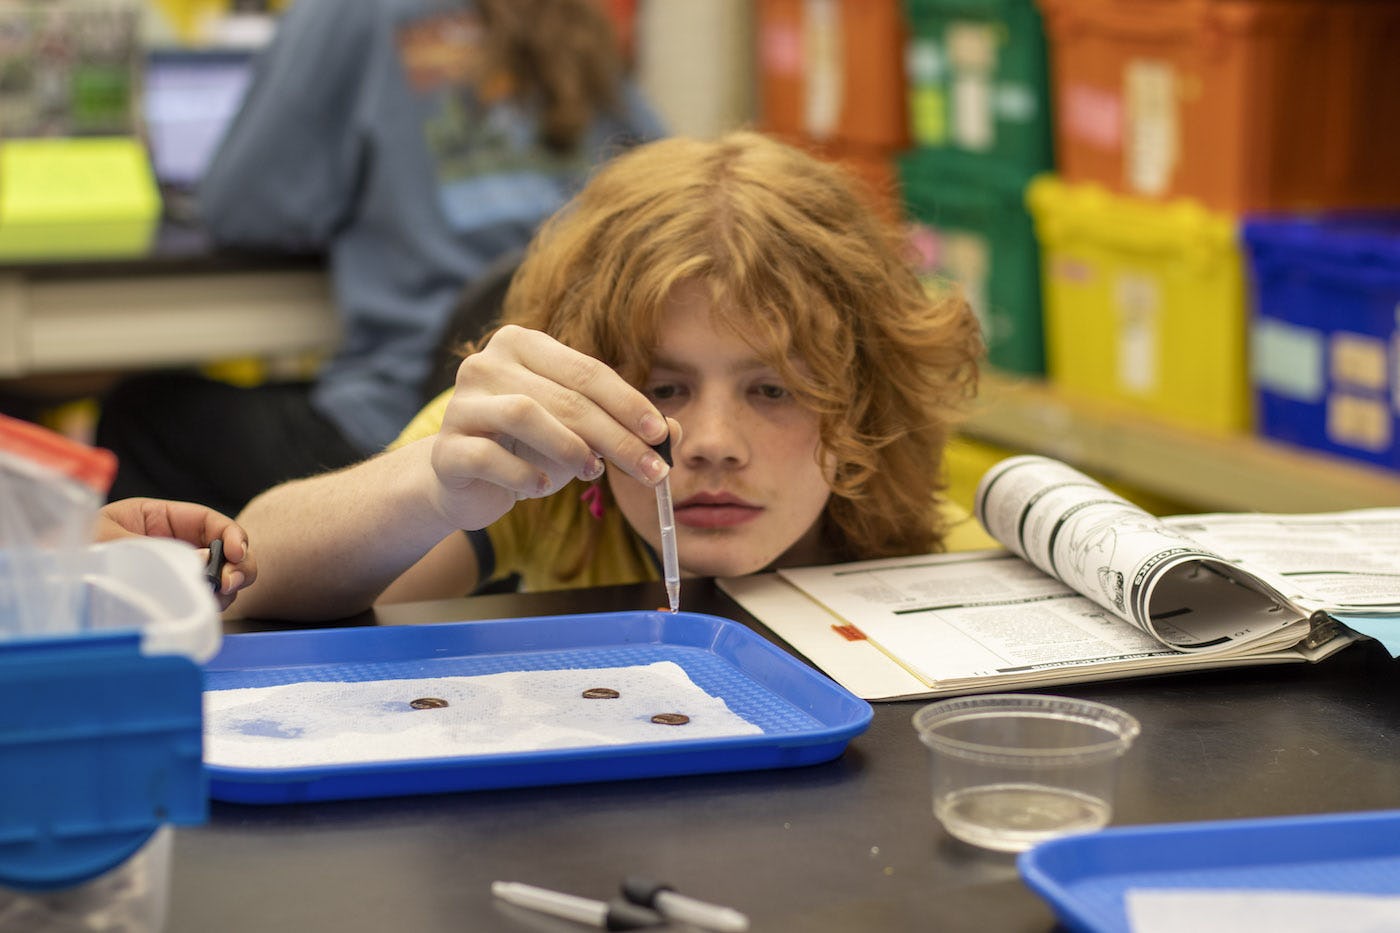 A student holds a dropper over an experiment